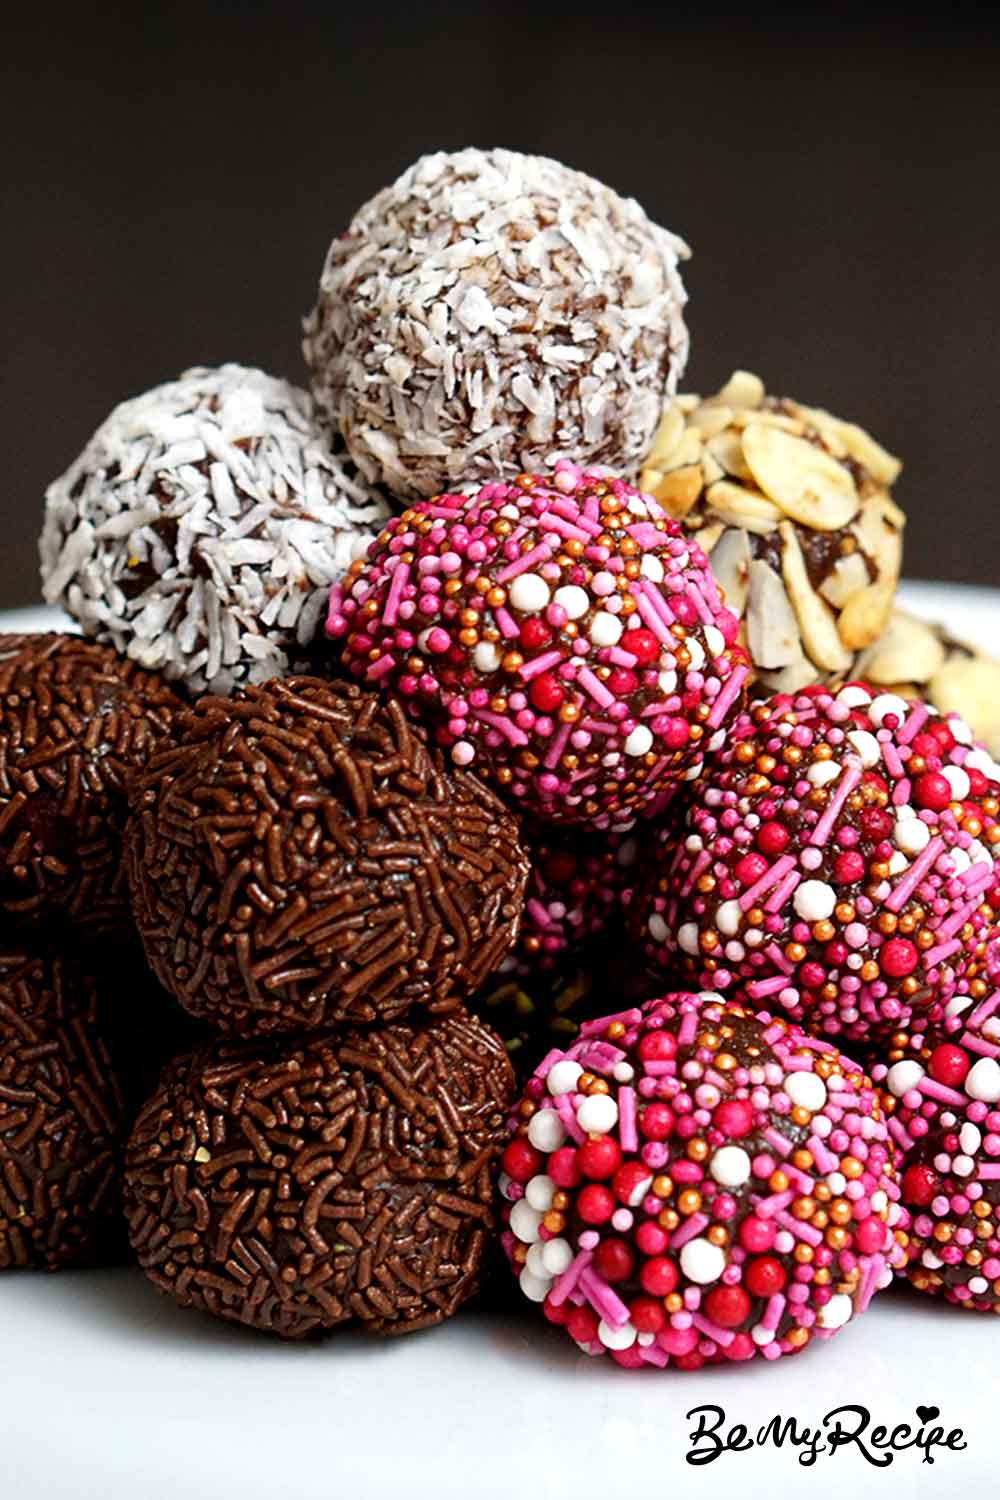 Homemade Chocolate Truffles (Perfect to Make Ahead for a Holiday Party or Any Dinner Party)